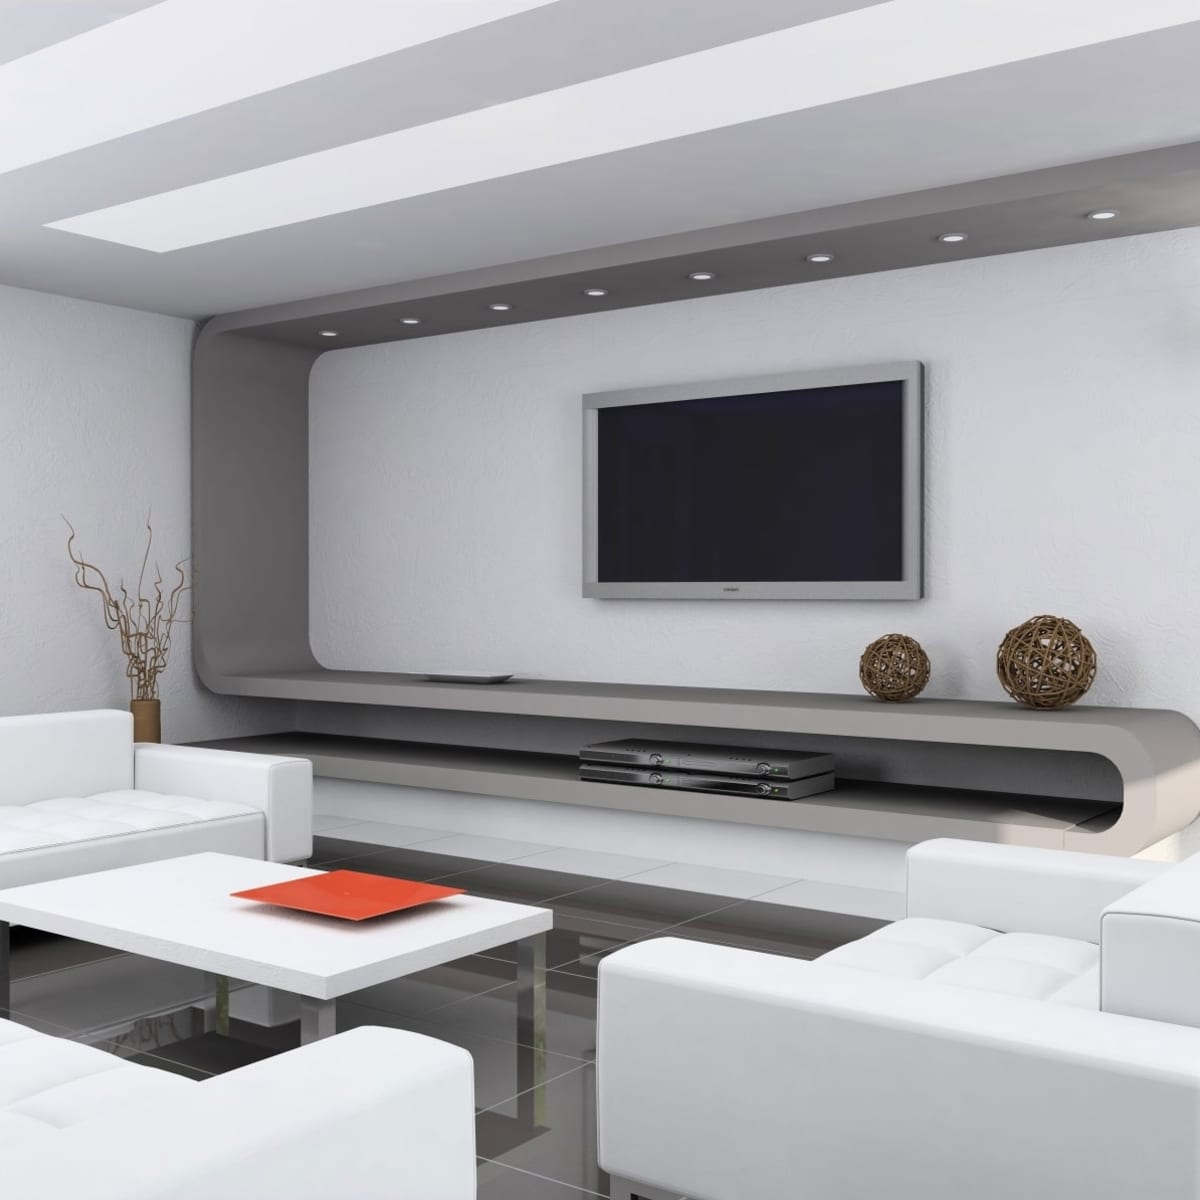 7 Elements of Interior Design that define and refine your space